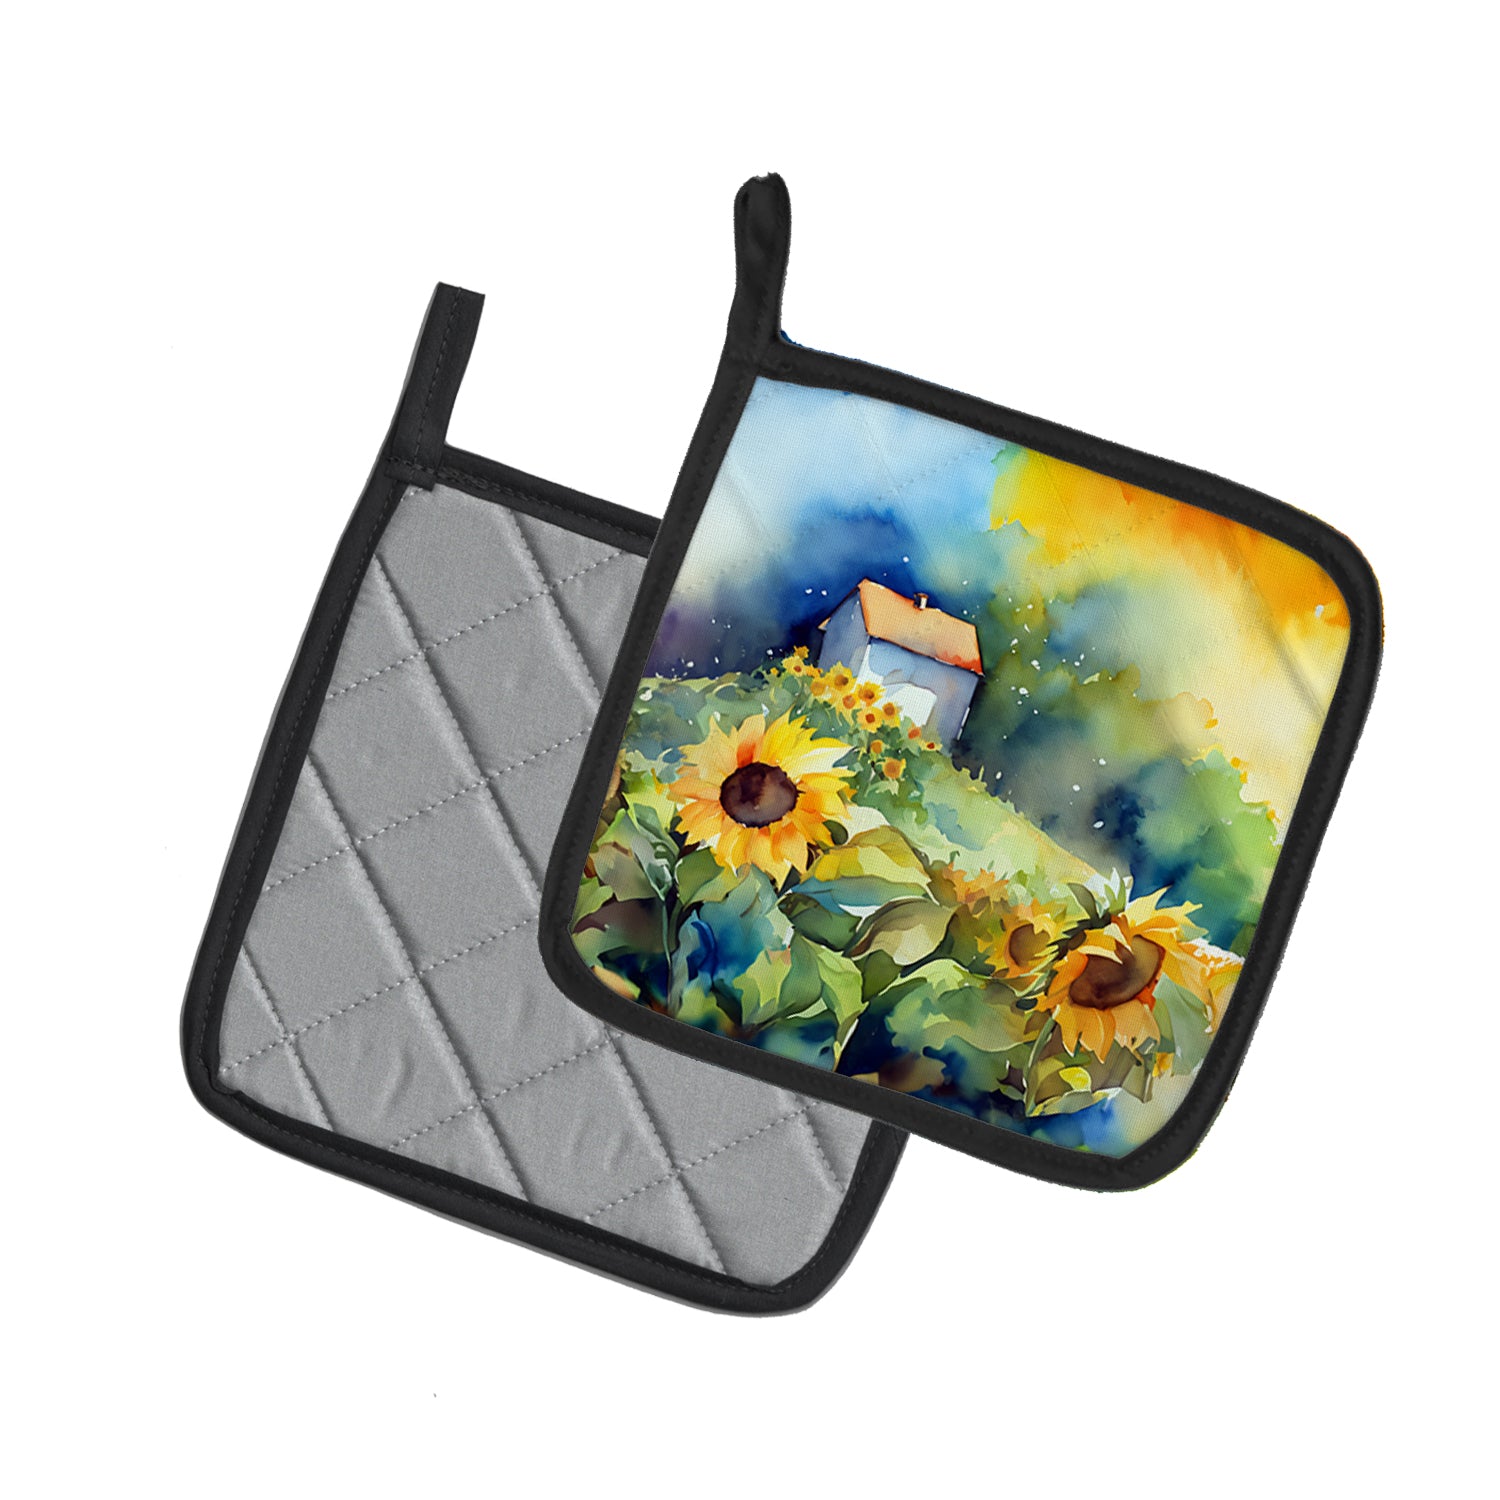 Sunflowers in Watercolor Pair of Pot Holders